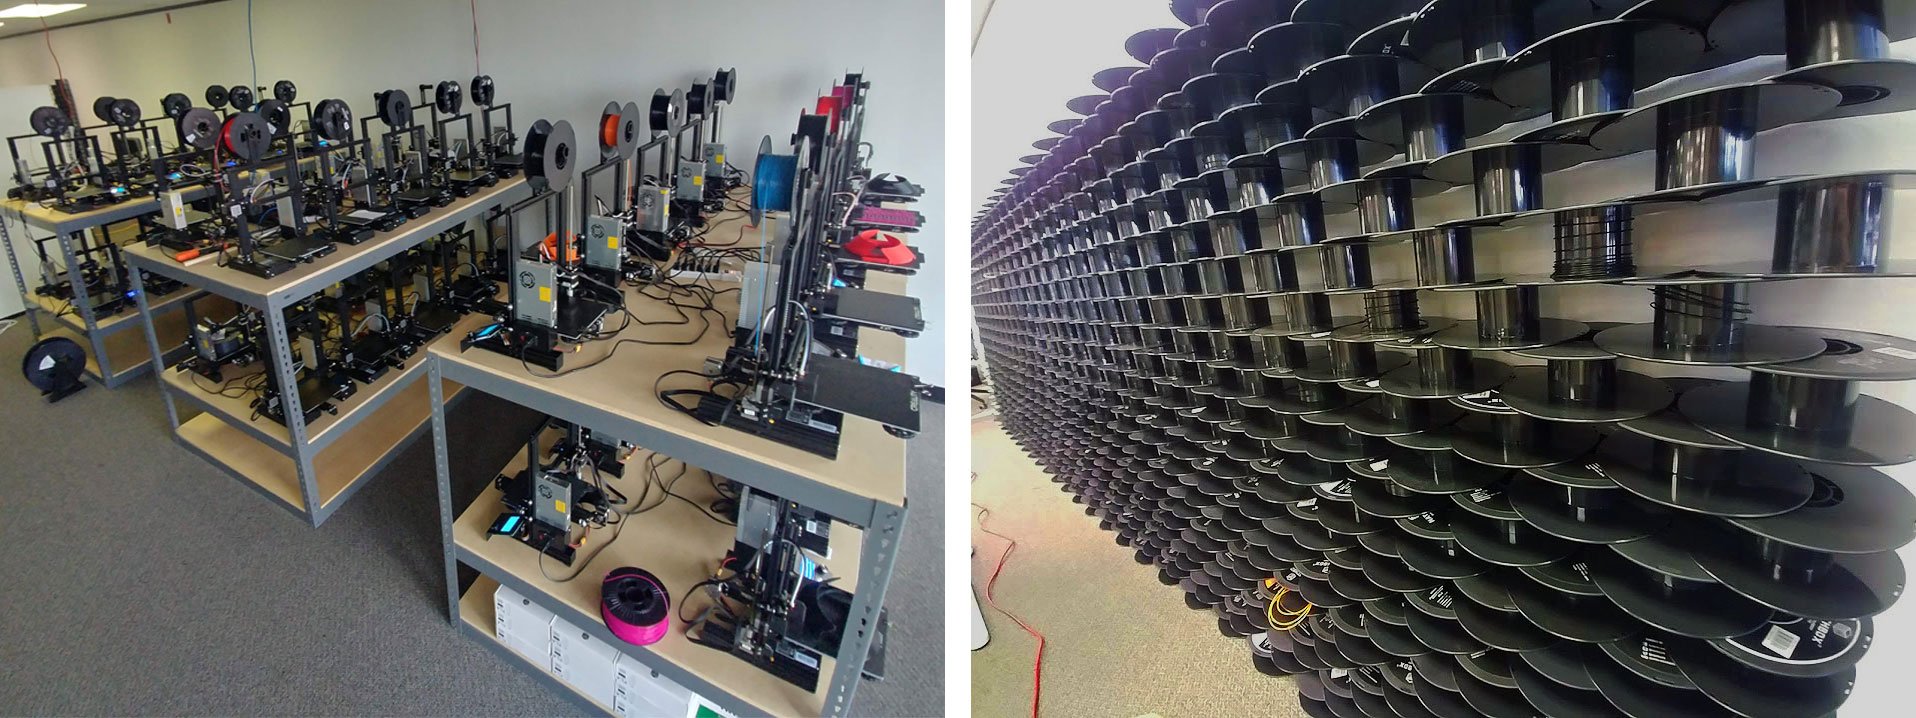 Left: Racks of active 3D printers making face shields. Right: Stacks of empty 3D printer filament spools.